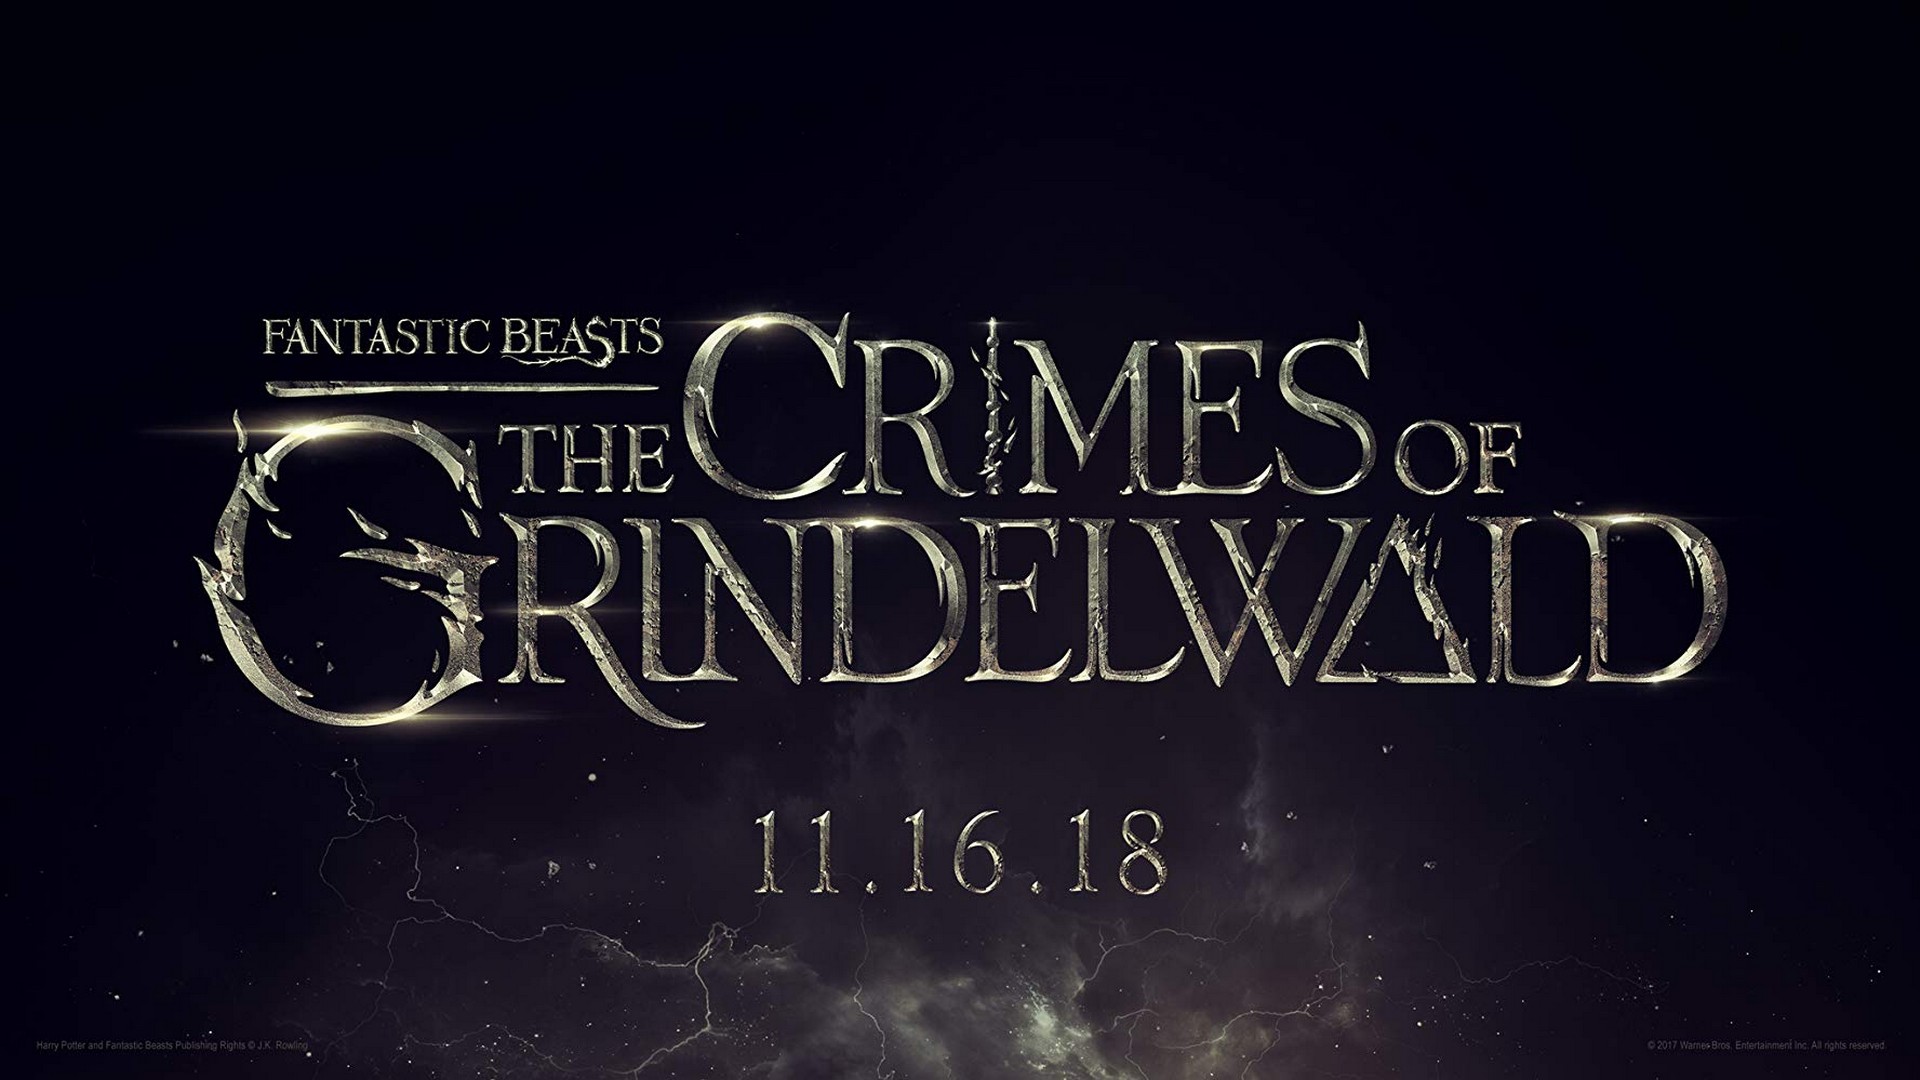 Fantastic Beasts The Crimes of Grindelwald 2018 Poster Wallpaper with resolution 1920x1080 pixel. You can make this wallpaper for your Mac or Windows Desktop Background, iPhone, Android or Tablet and another Smartphone device